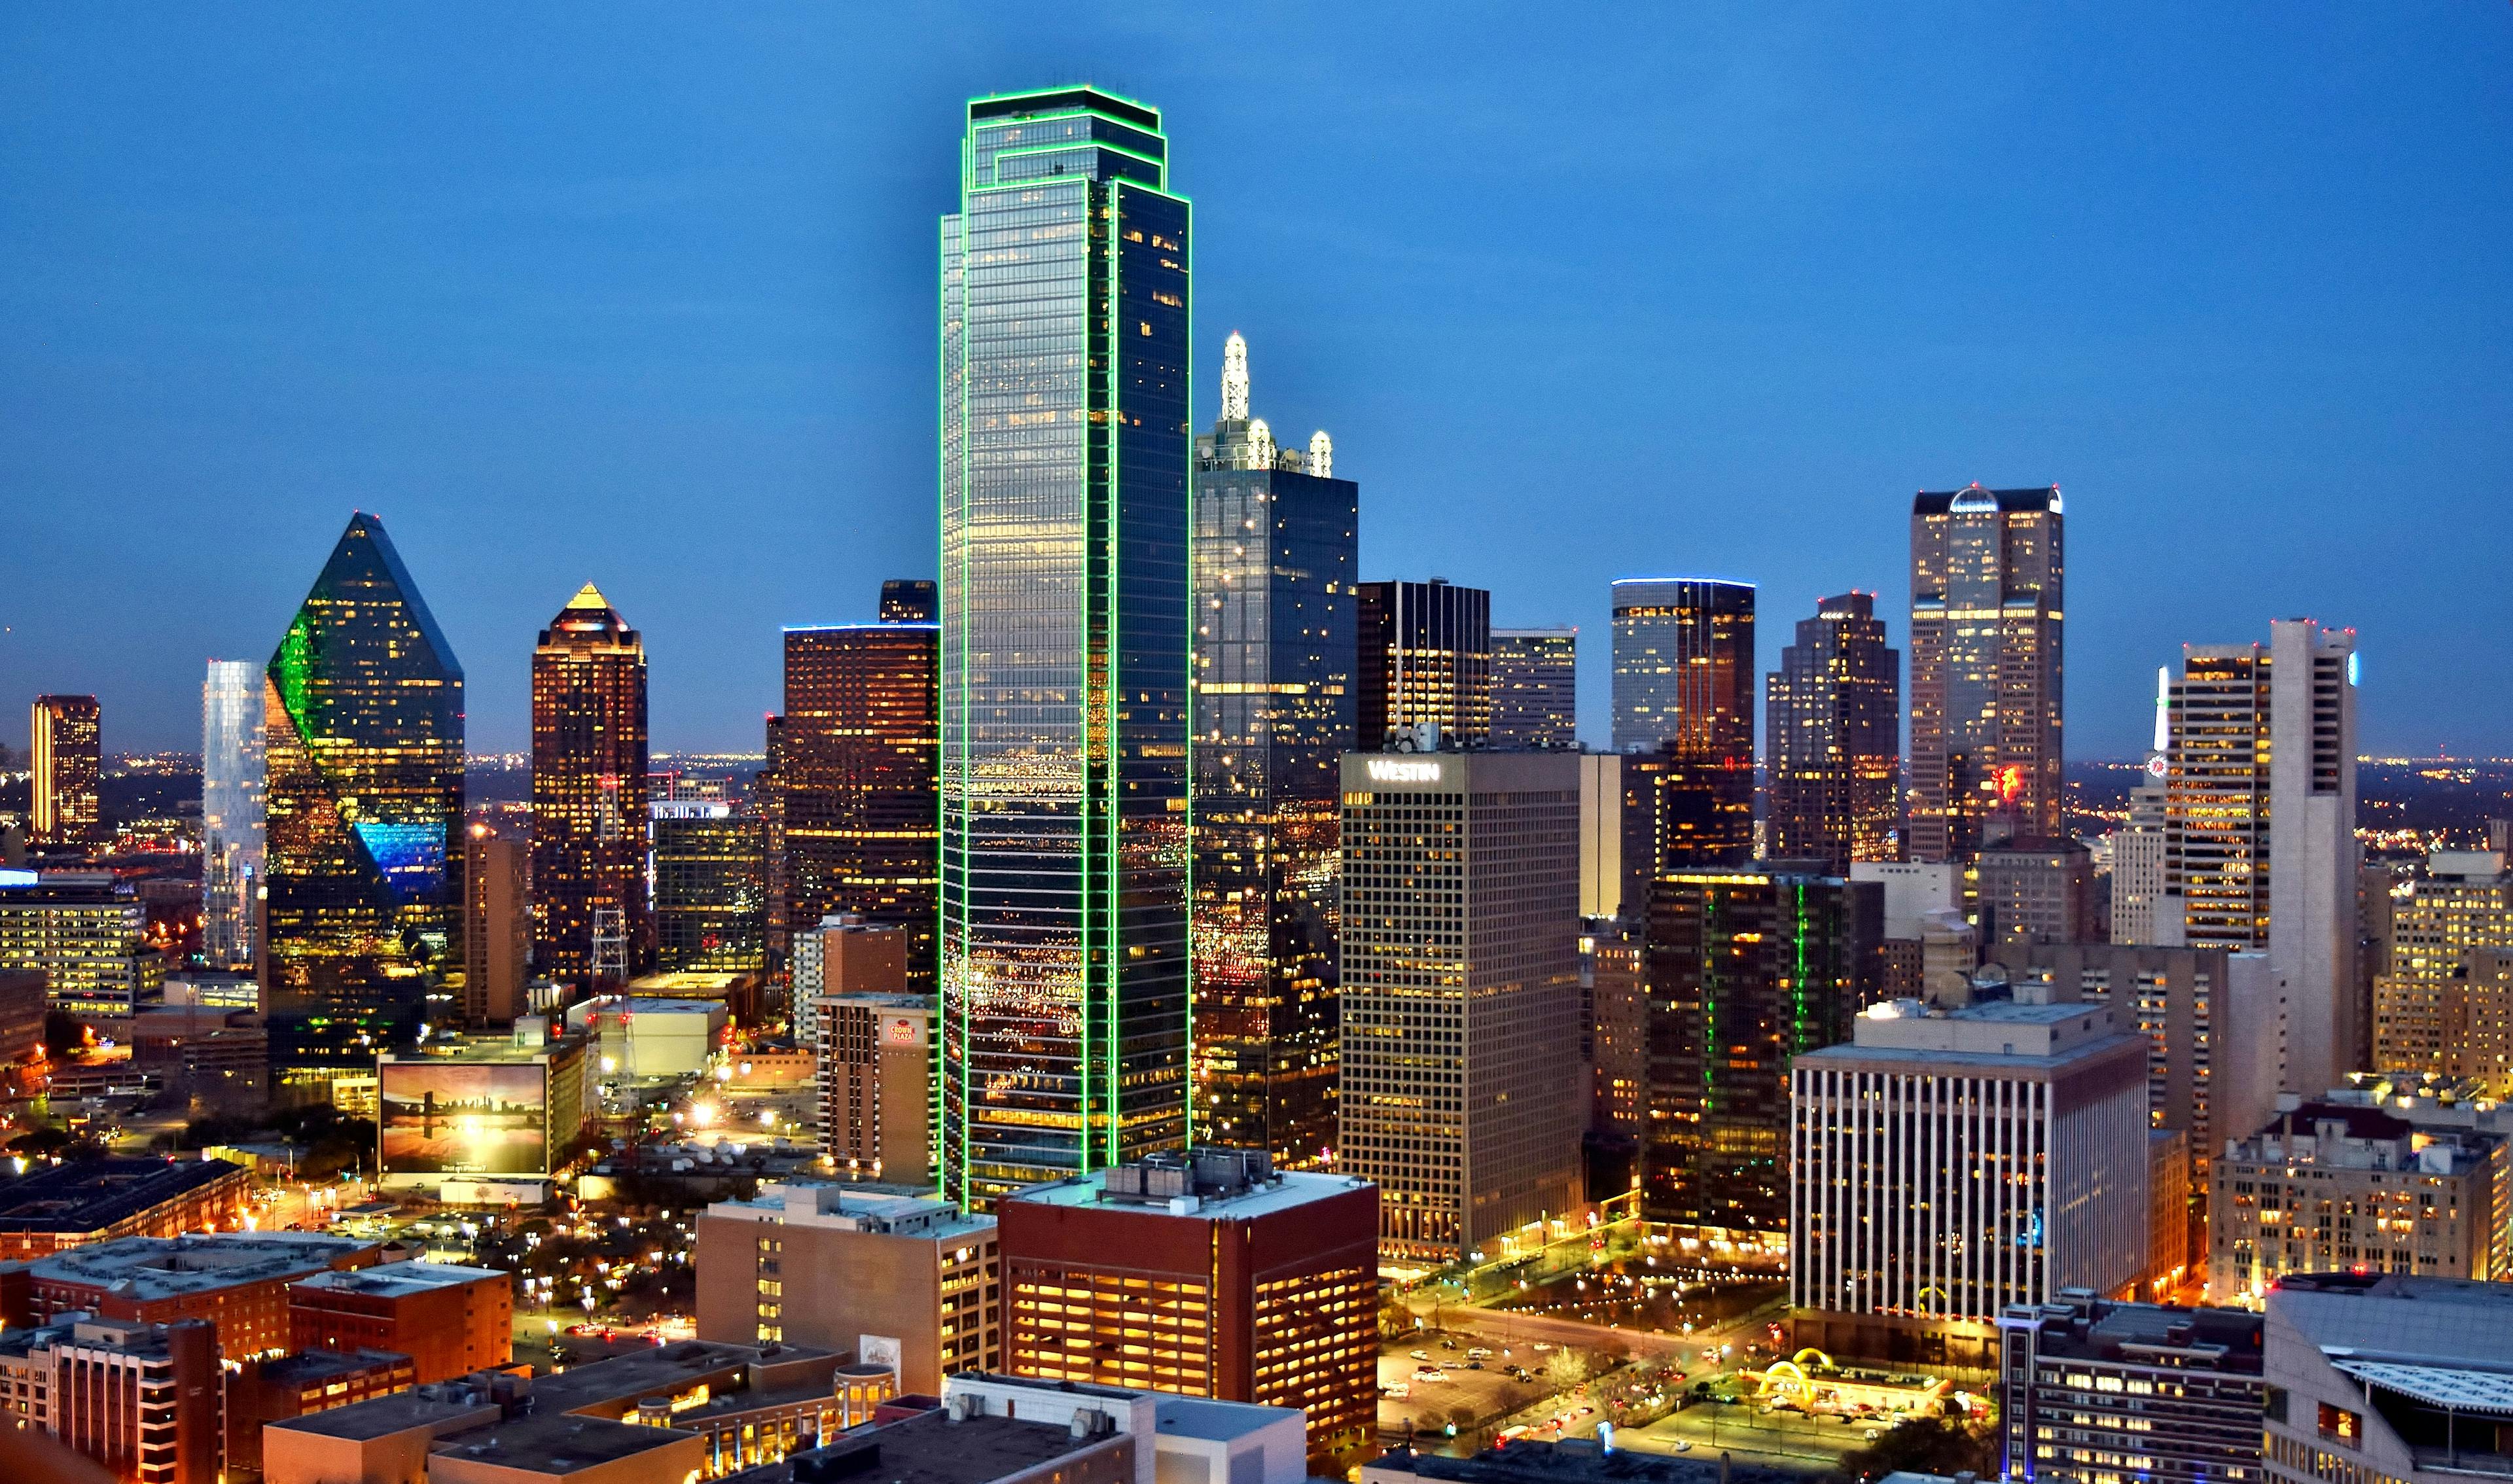 Image of downtown Dallas